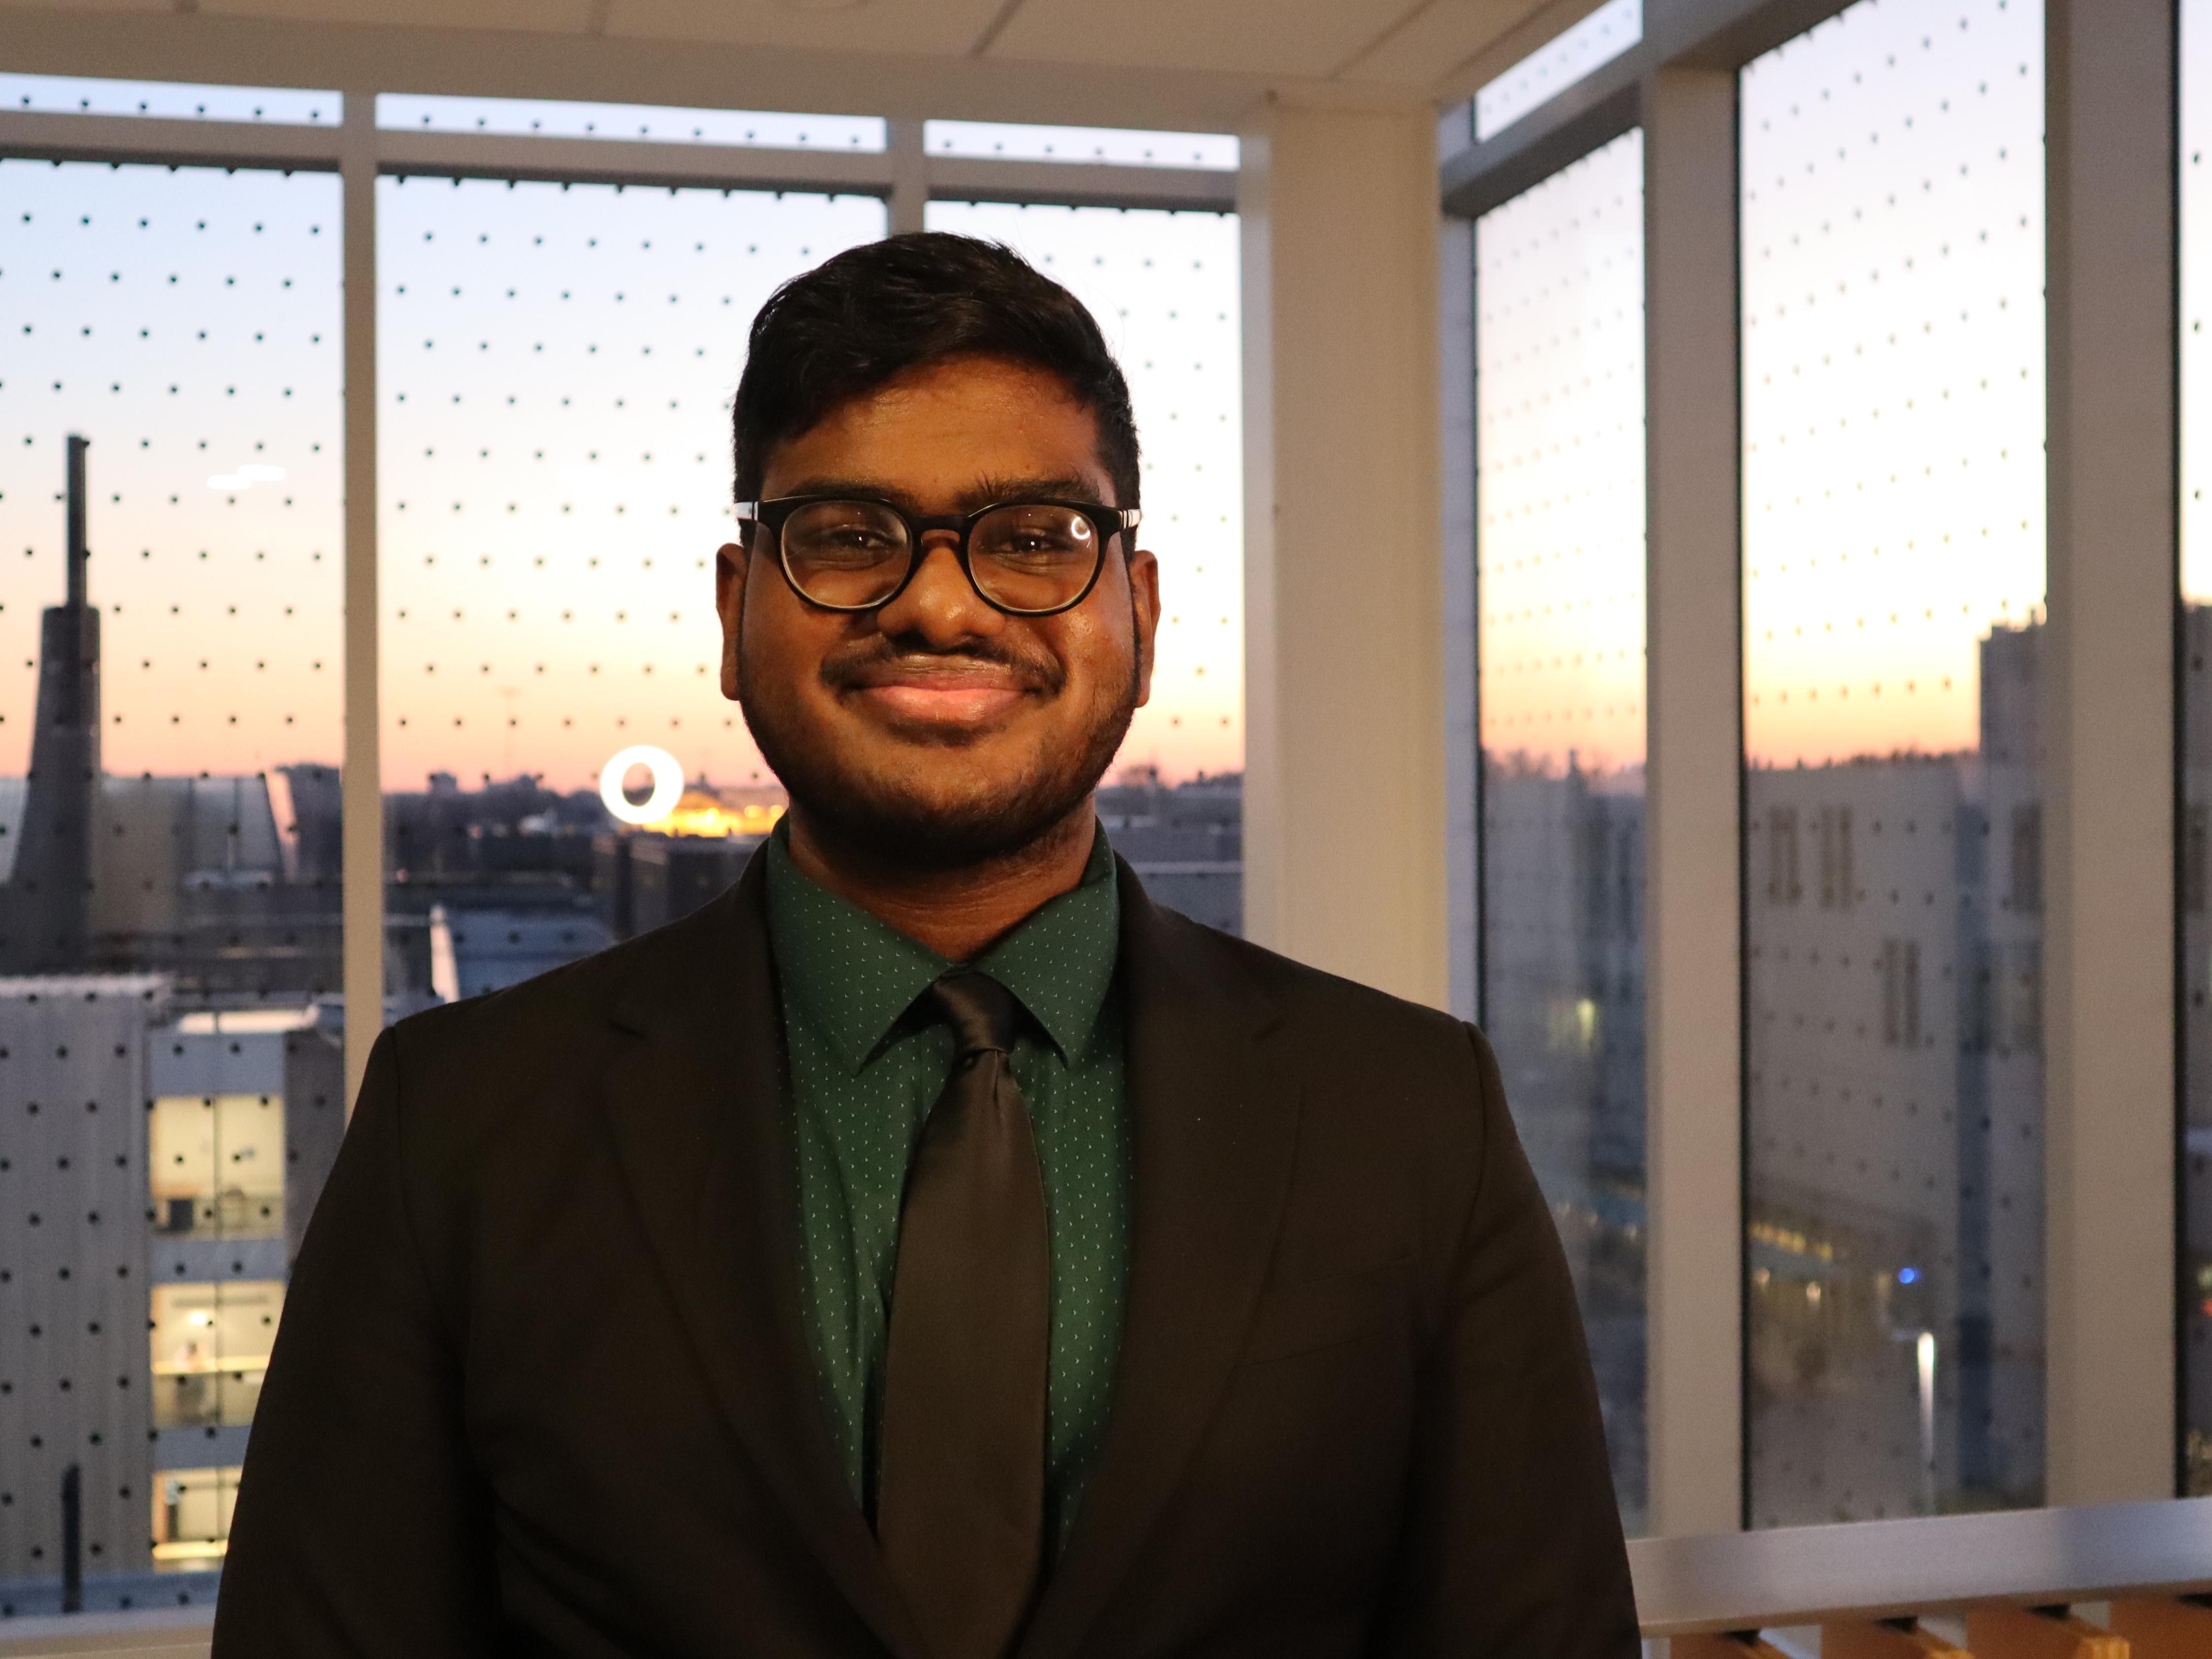 Congratulations to Bavan Pushpalingam, a 2nd-year UTSC student majoring in Public Policy, for being nominated to represent Canada at the G7 Youth Summit in Rome in May 2024!